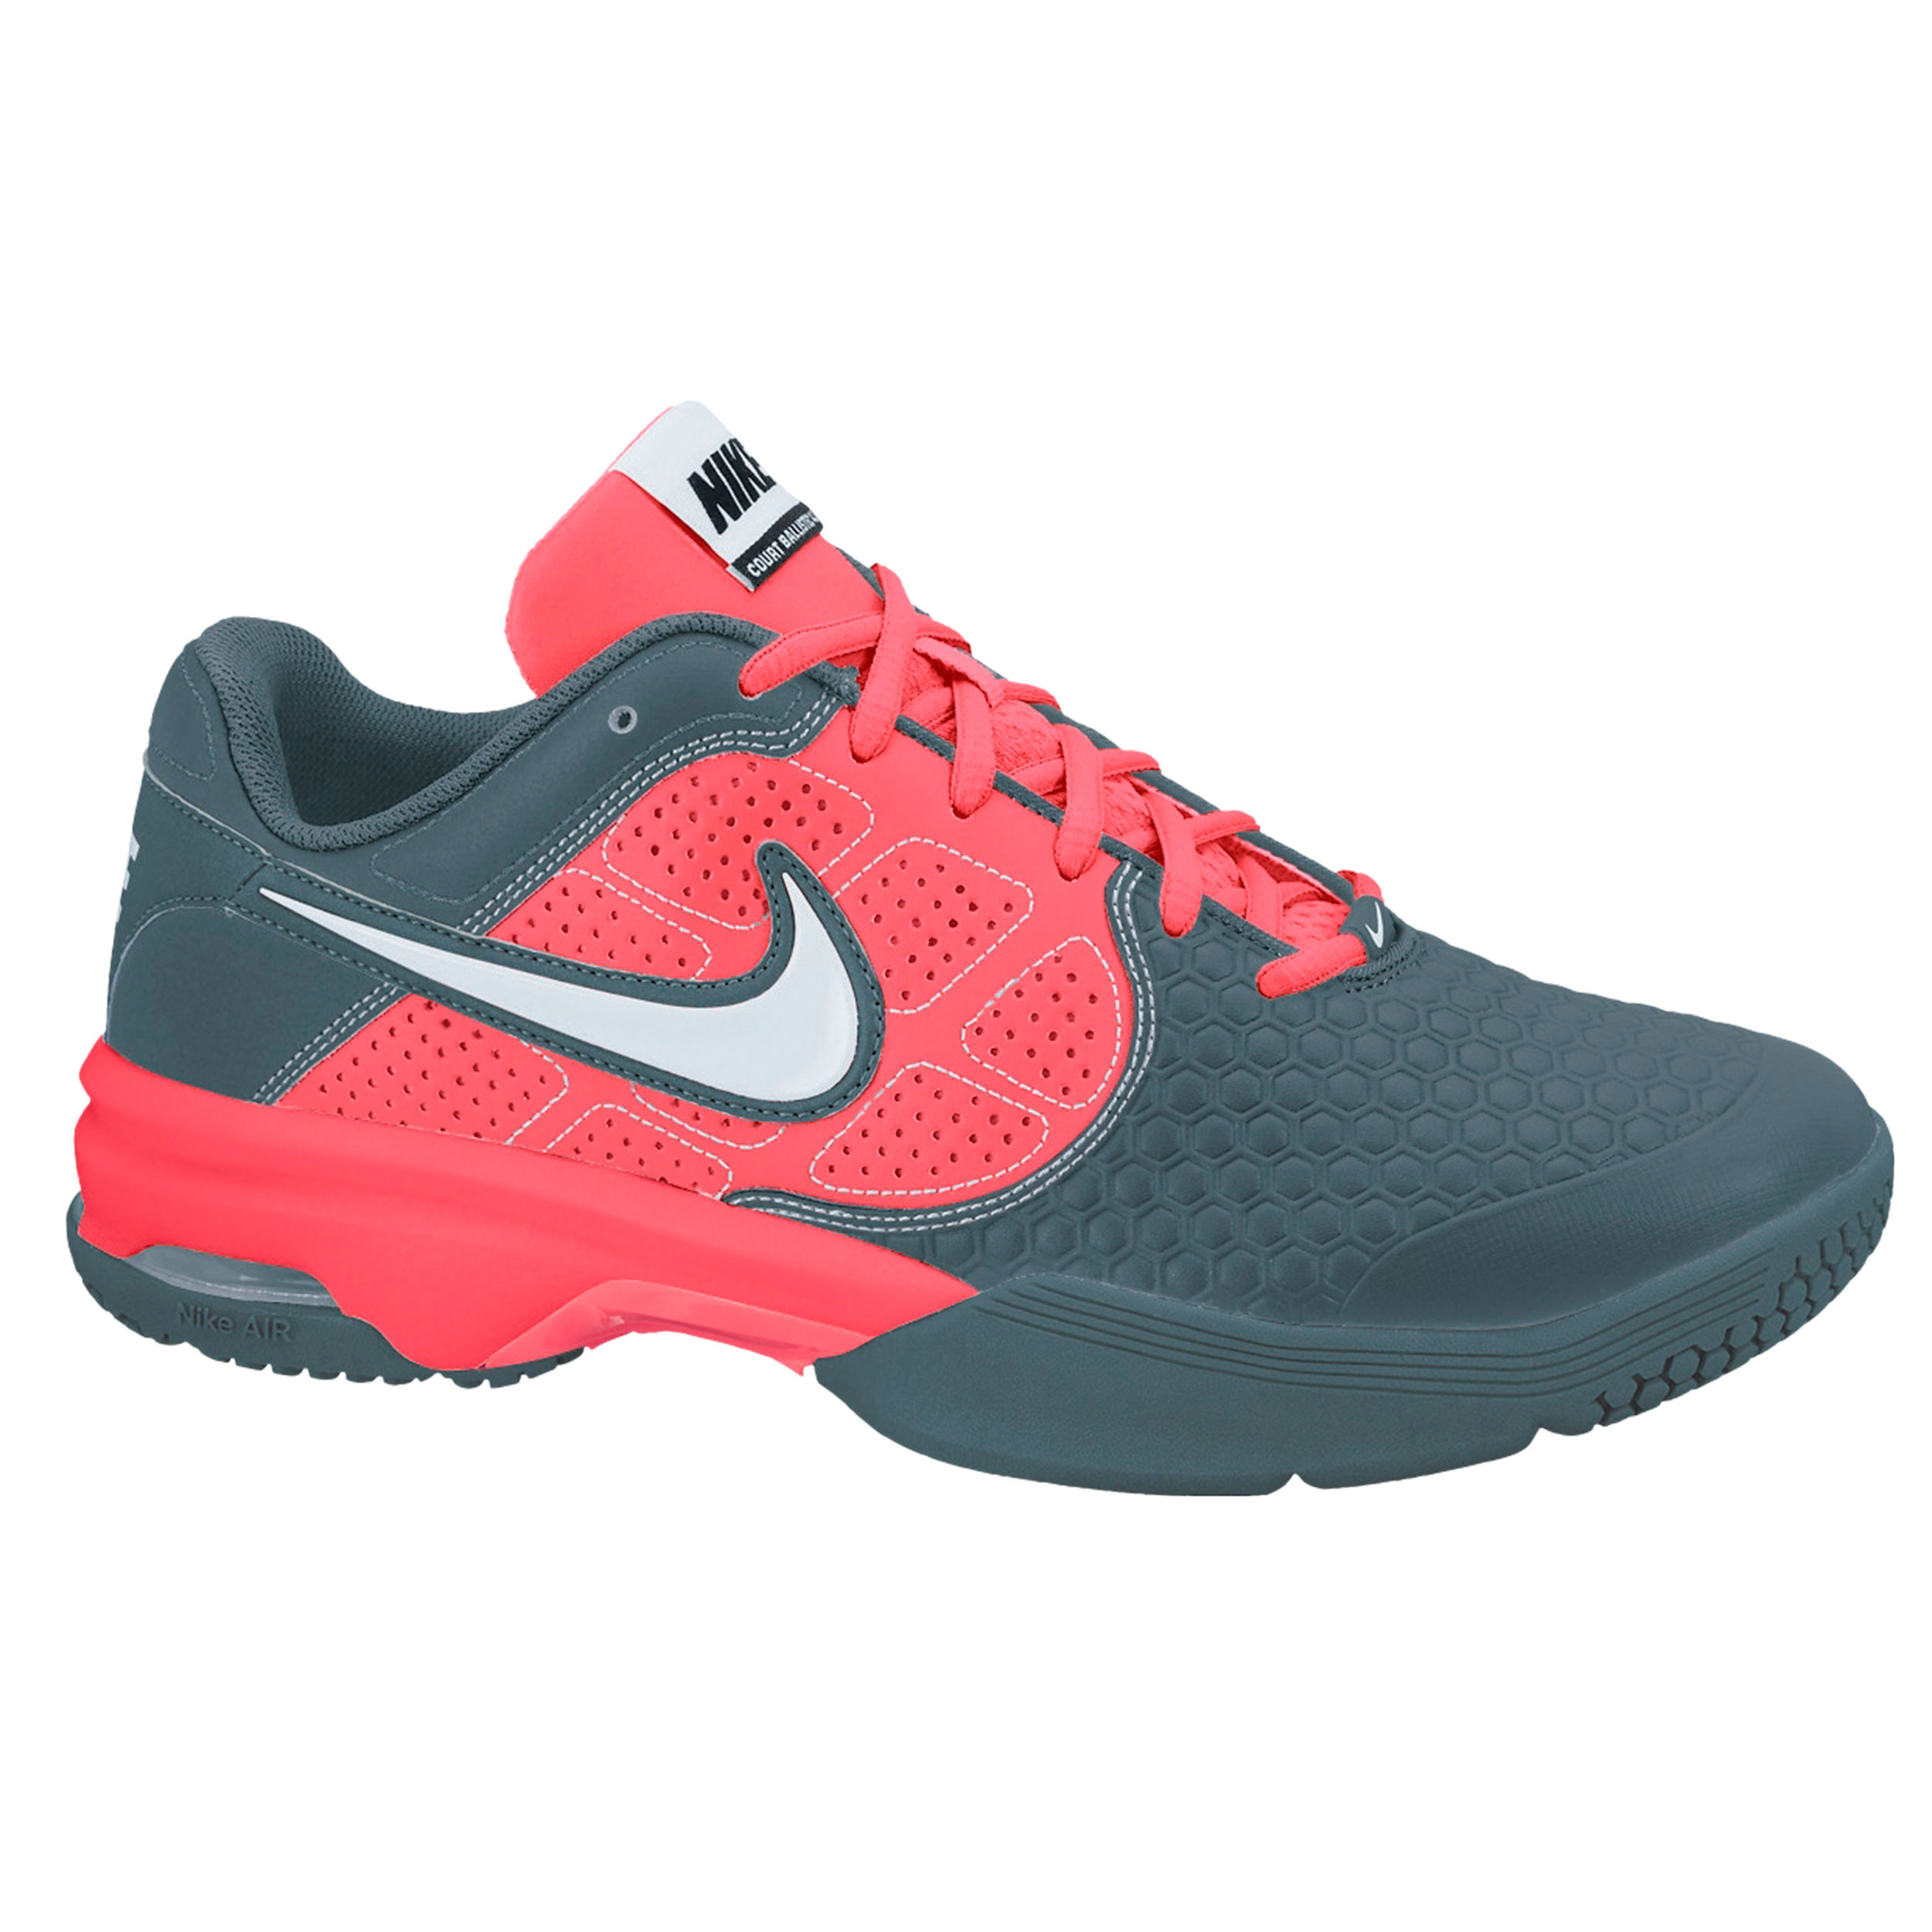 OUTLET tennis shoes for men - - buy online at Tennis-